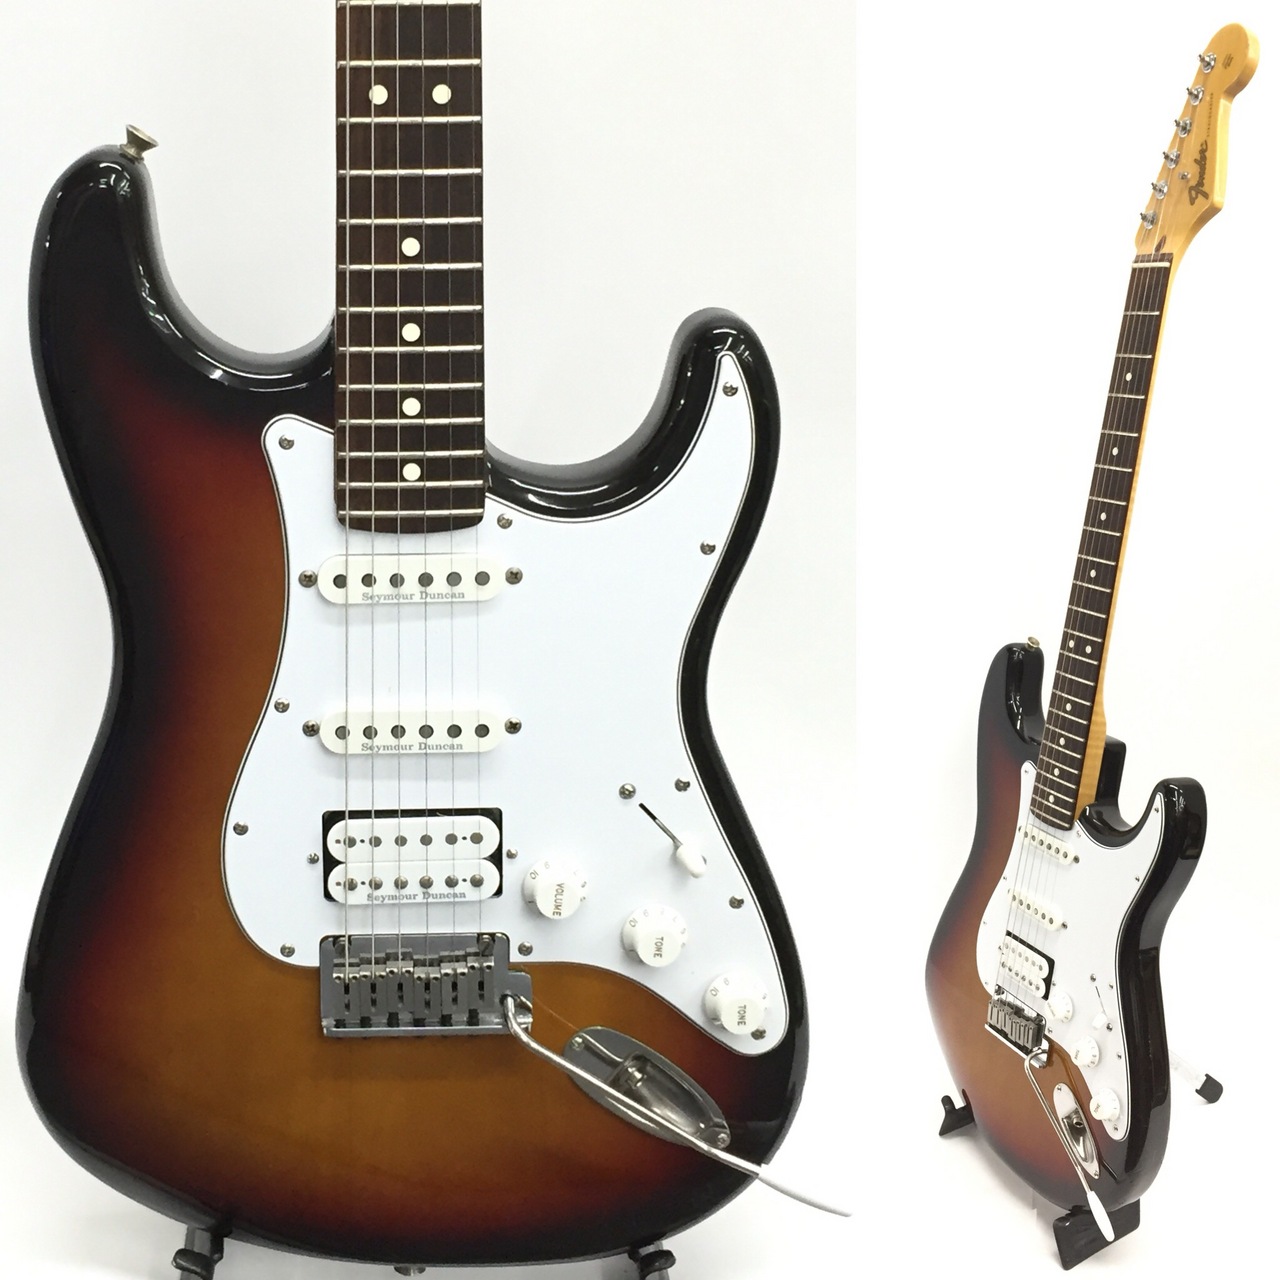 Fender Japan ST-650 LIMITED EDITION STRATOCASTER SPECIAL 1987-1988 